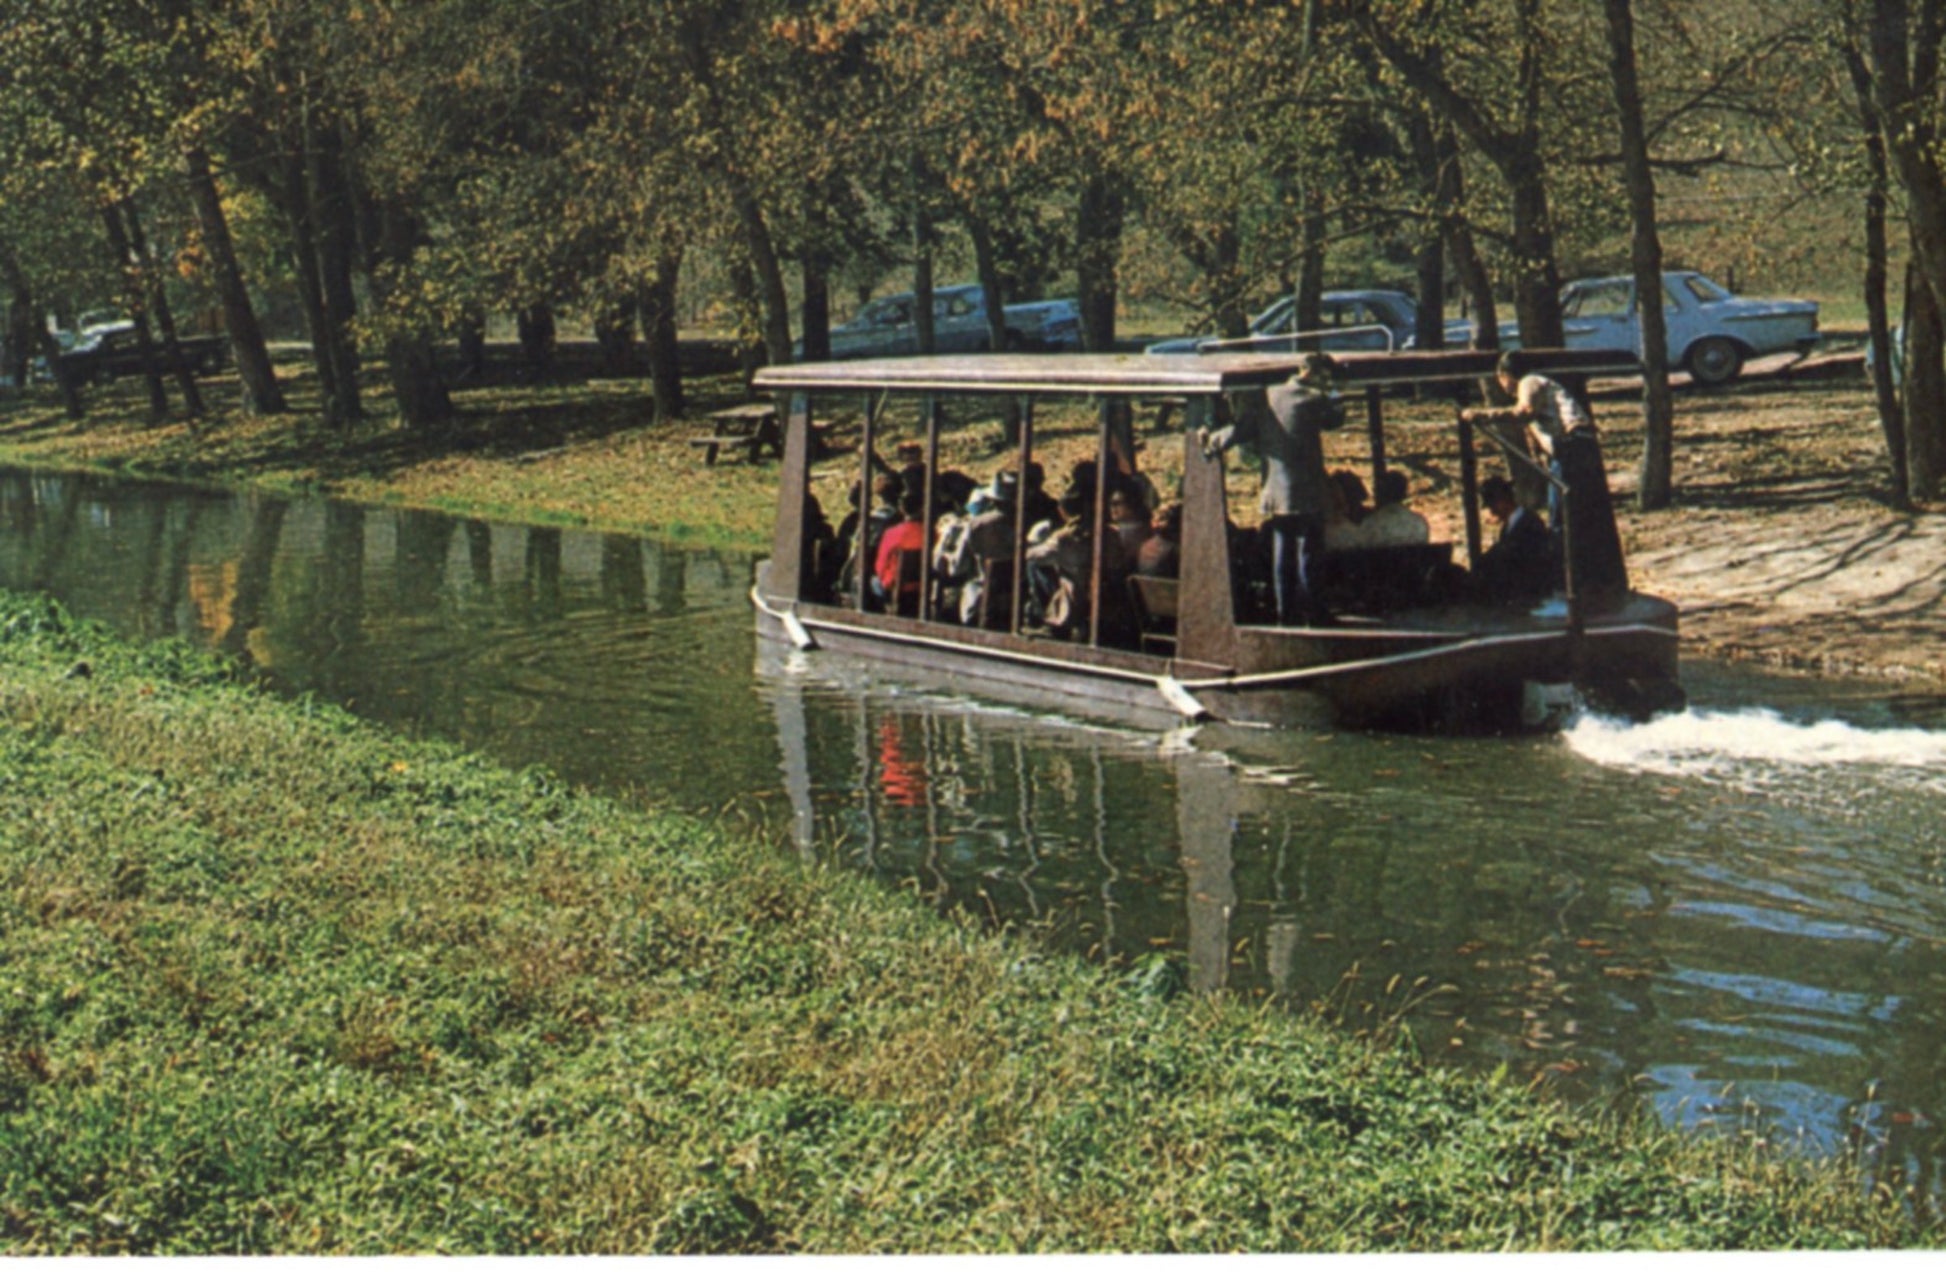 Canal Boat on Restored Whitewater Canal METAMORA INDIANA Vintage Postcard